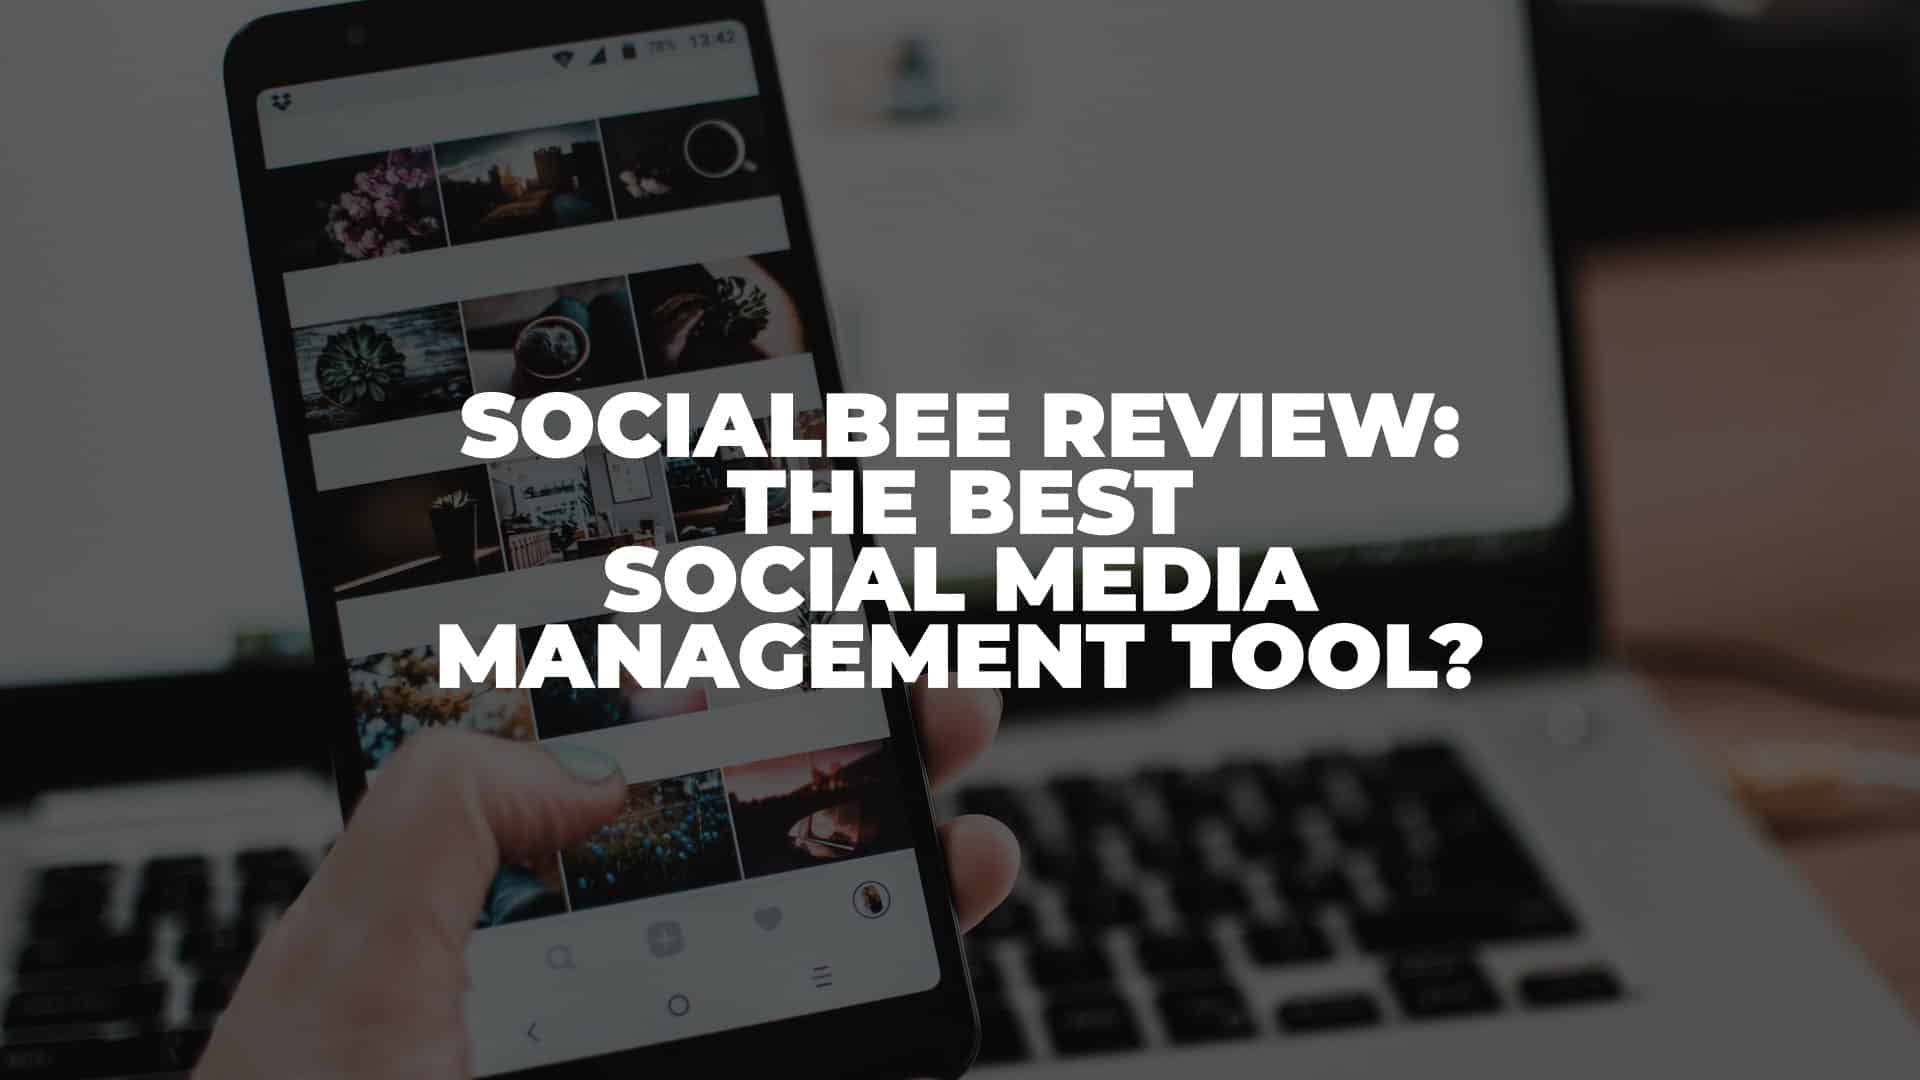 SocialBee Review - Featured Image